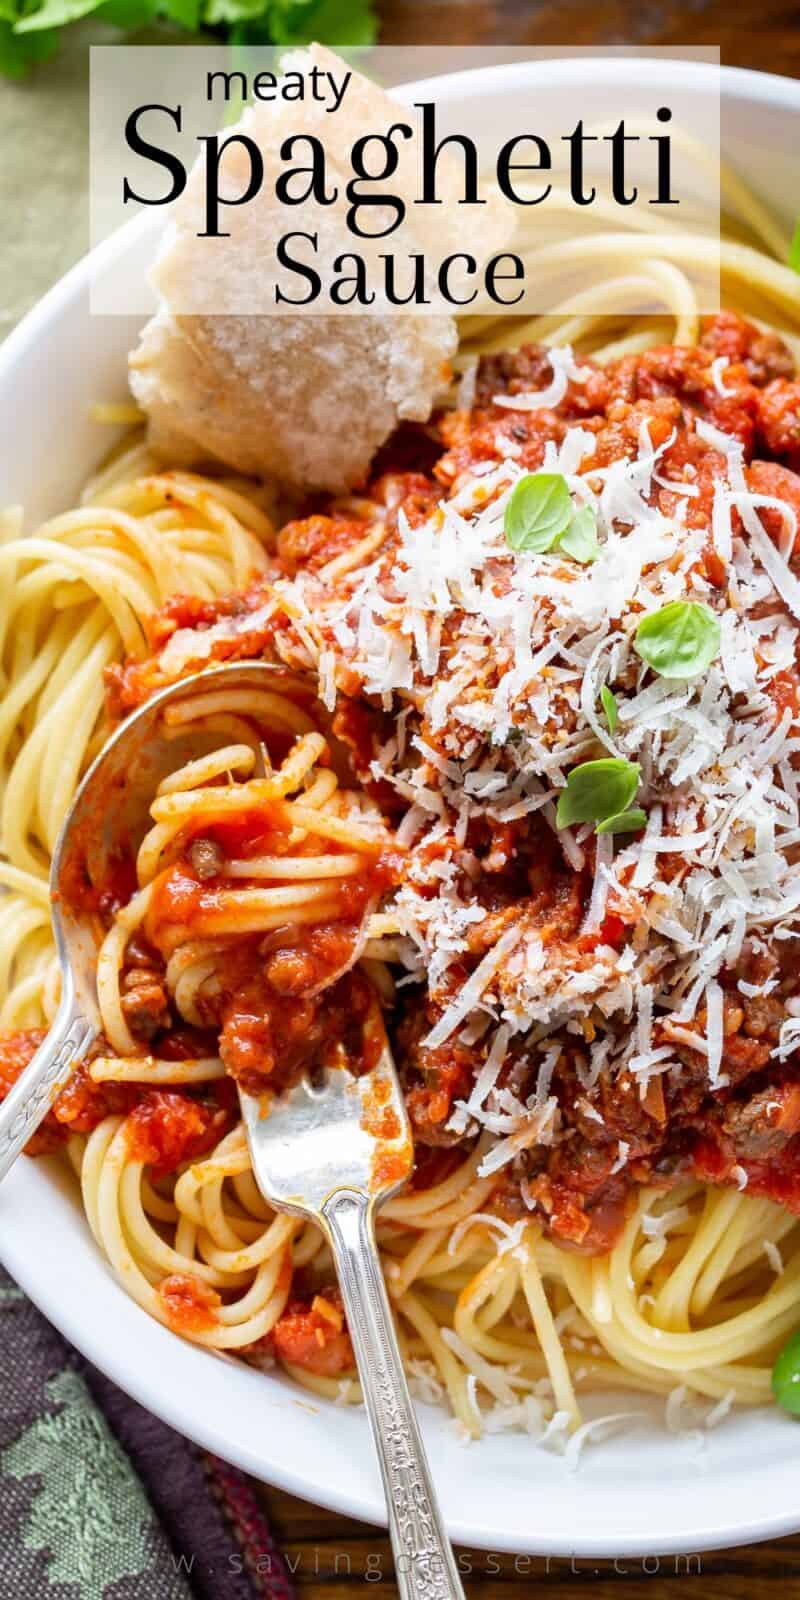 Overhead view of a bowl of pasta covered in a rich meaty spaghetti sauce